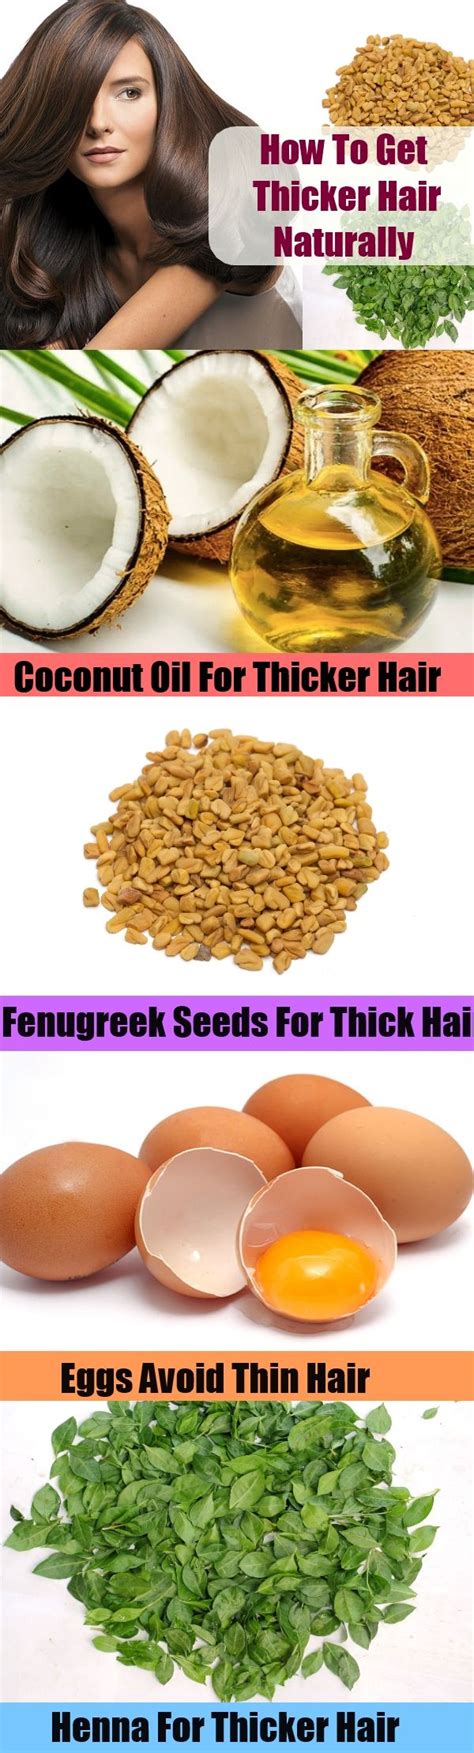 How To Get Thicker Hair Naturally Thick Hair Styles Thicker Hair